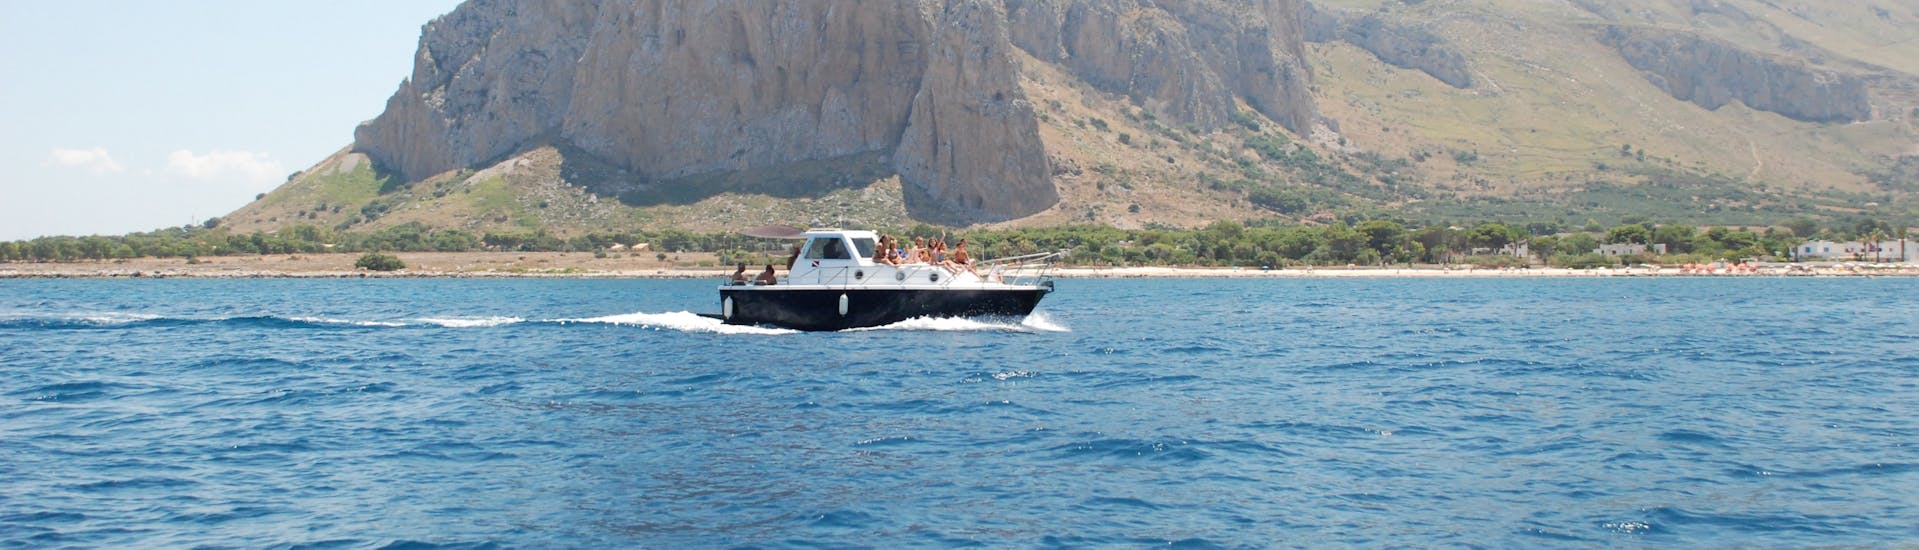 Primero's boat navigating in front of the promontory of San Vito Lo Capo during the Private Boat Trip around San Vito Lo Capo with Lunch and Apéritif with Primero.